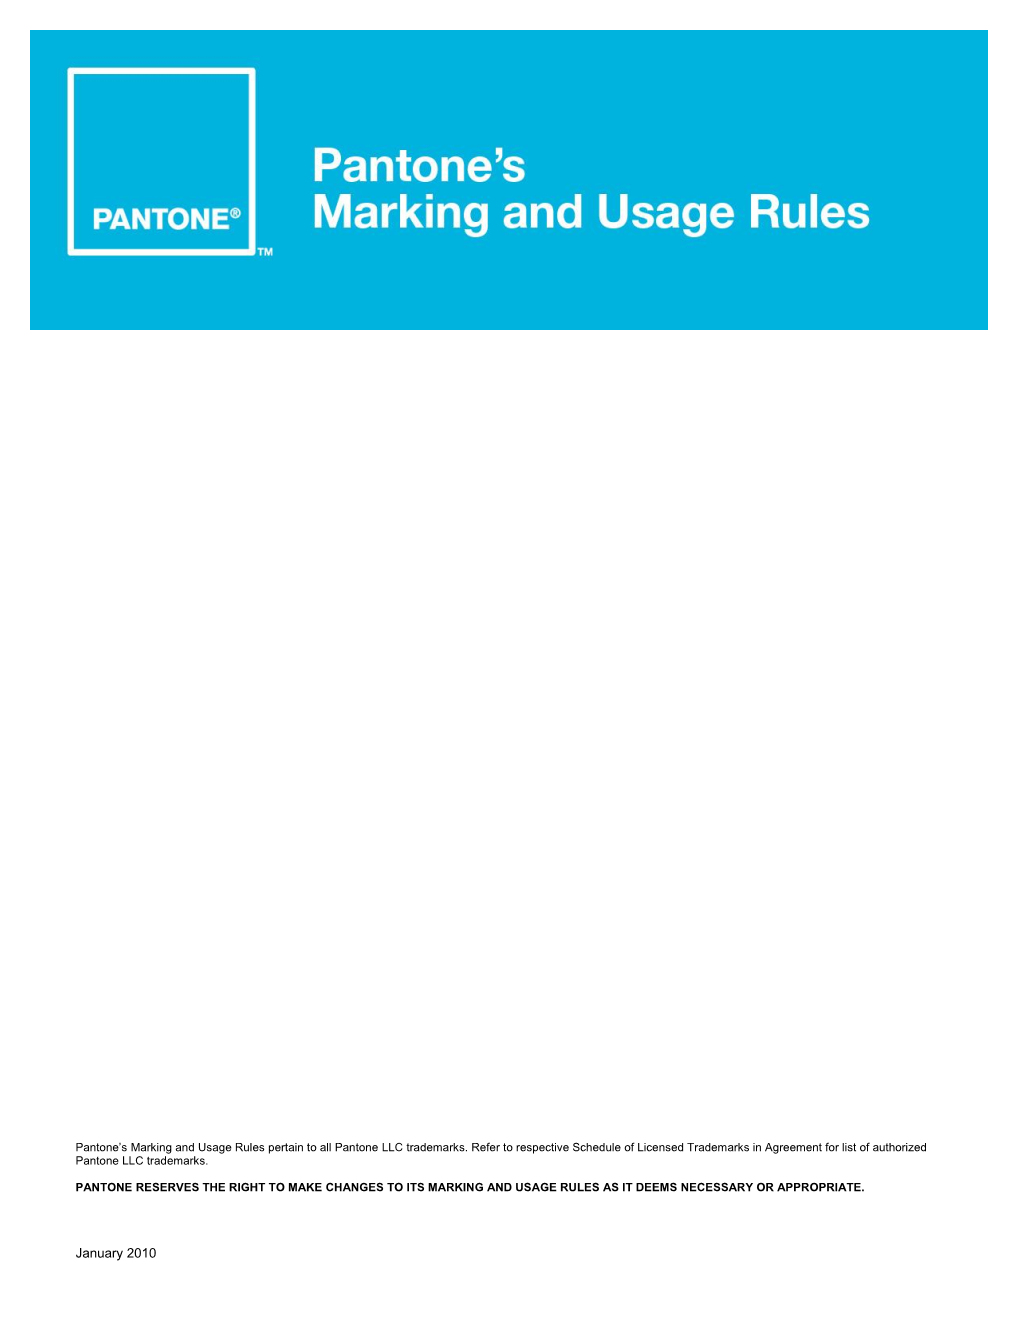 The Following Are Rules (“Rules”) for the Use of Pantone